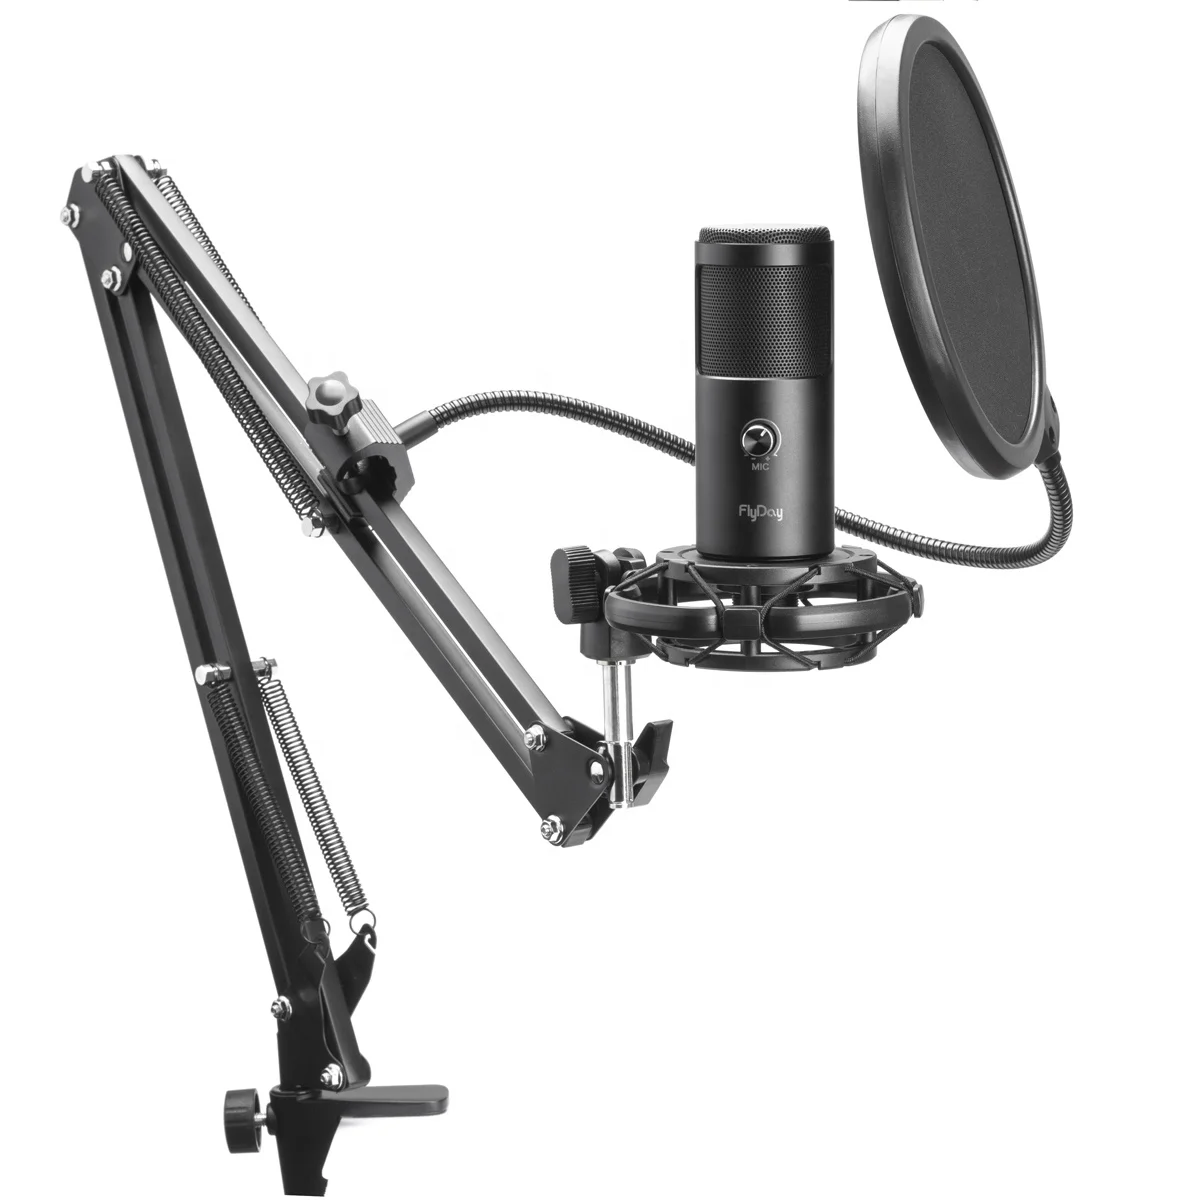 

OEM Factory High-end USB Microfone, usb podcast gaming mic, Studio Recording mike Condenser Microphone Streaming